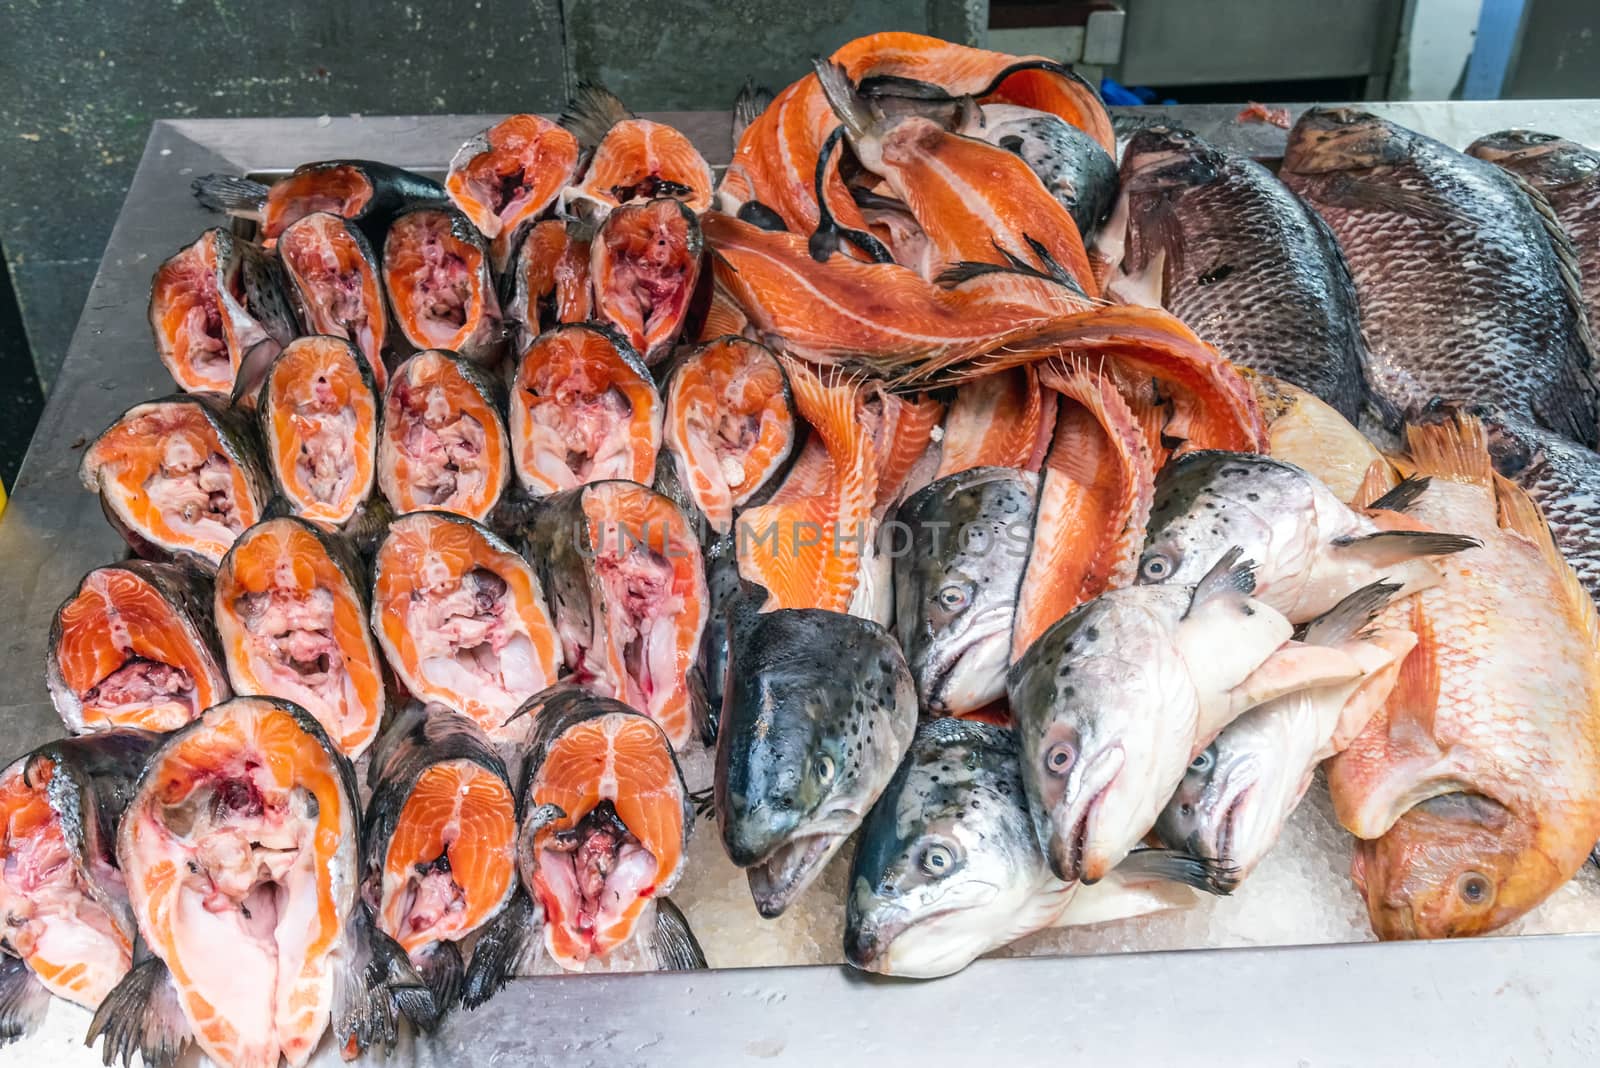 Parts of salmons for sale at a market